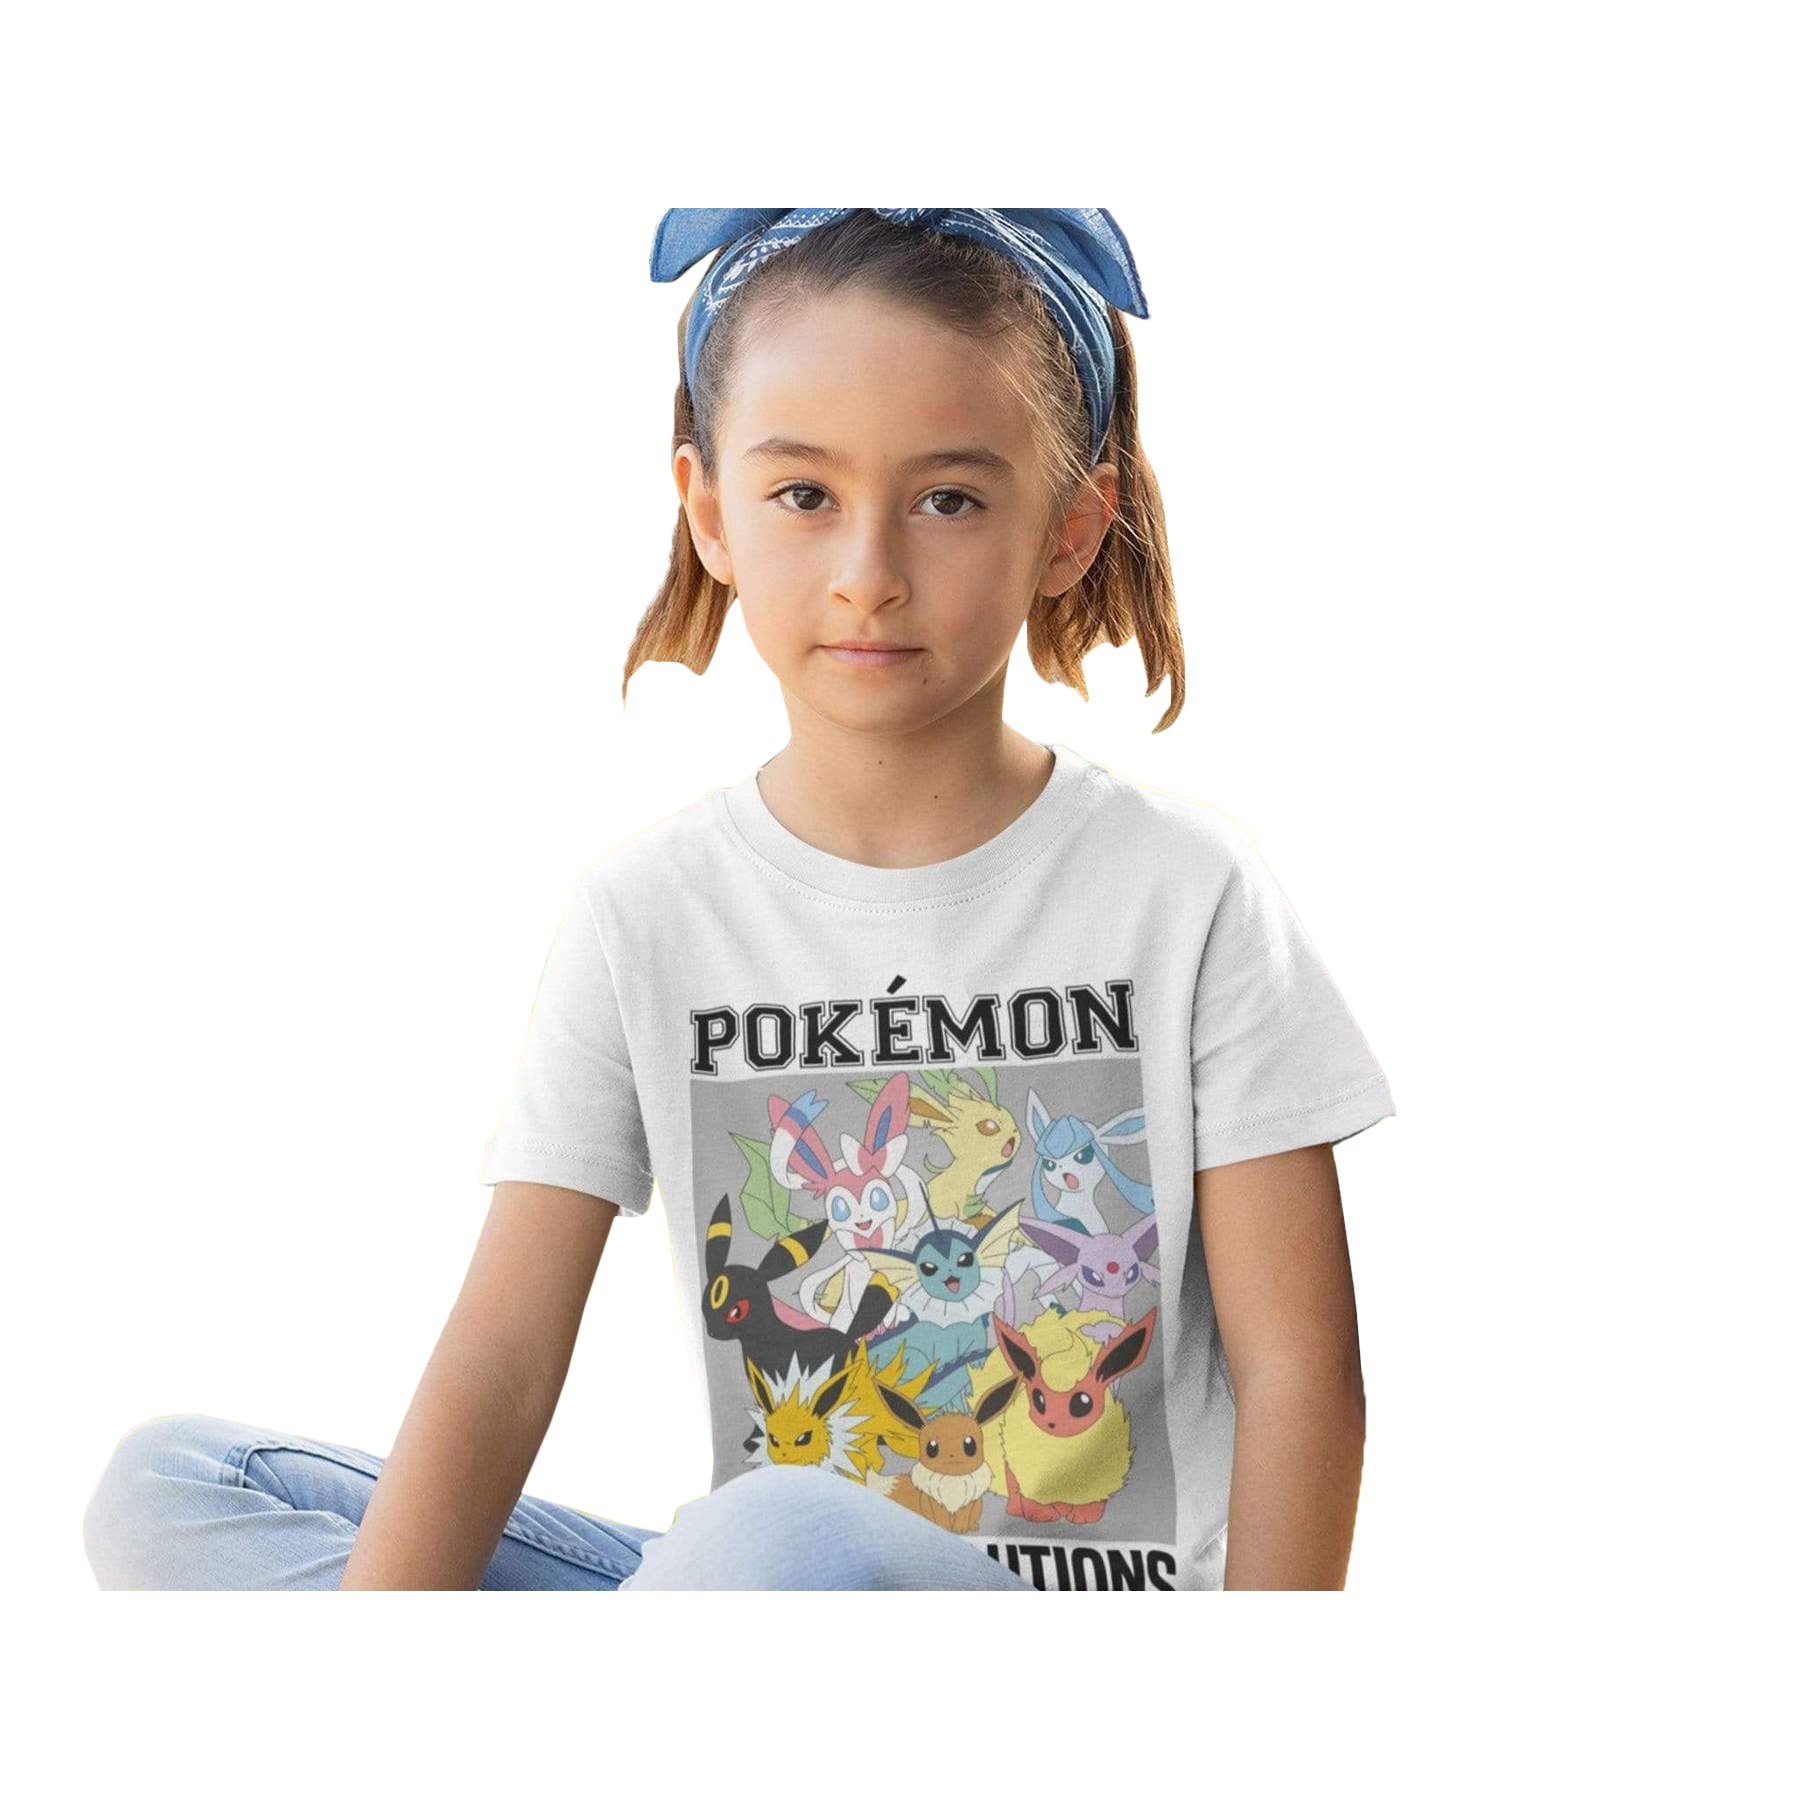 E-evee Evolution Fire Water Kids T-Shirts Long Sleeve Tees Fashion Tops for Boys/Girls